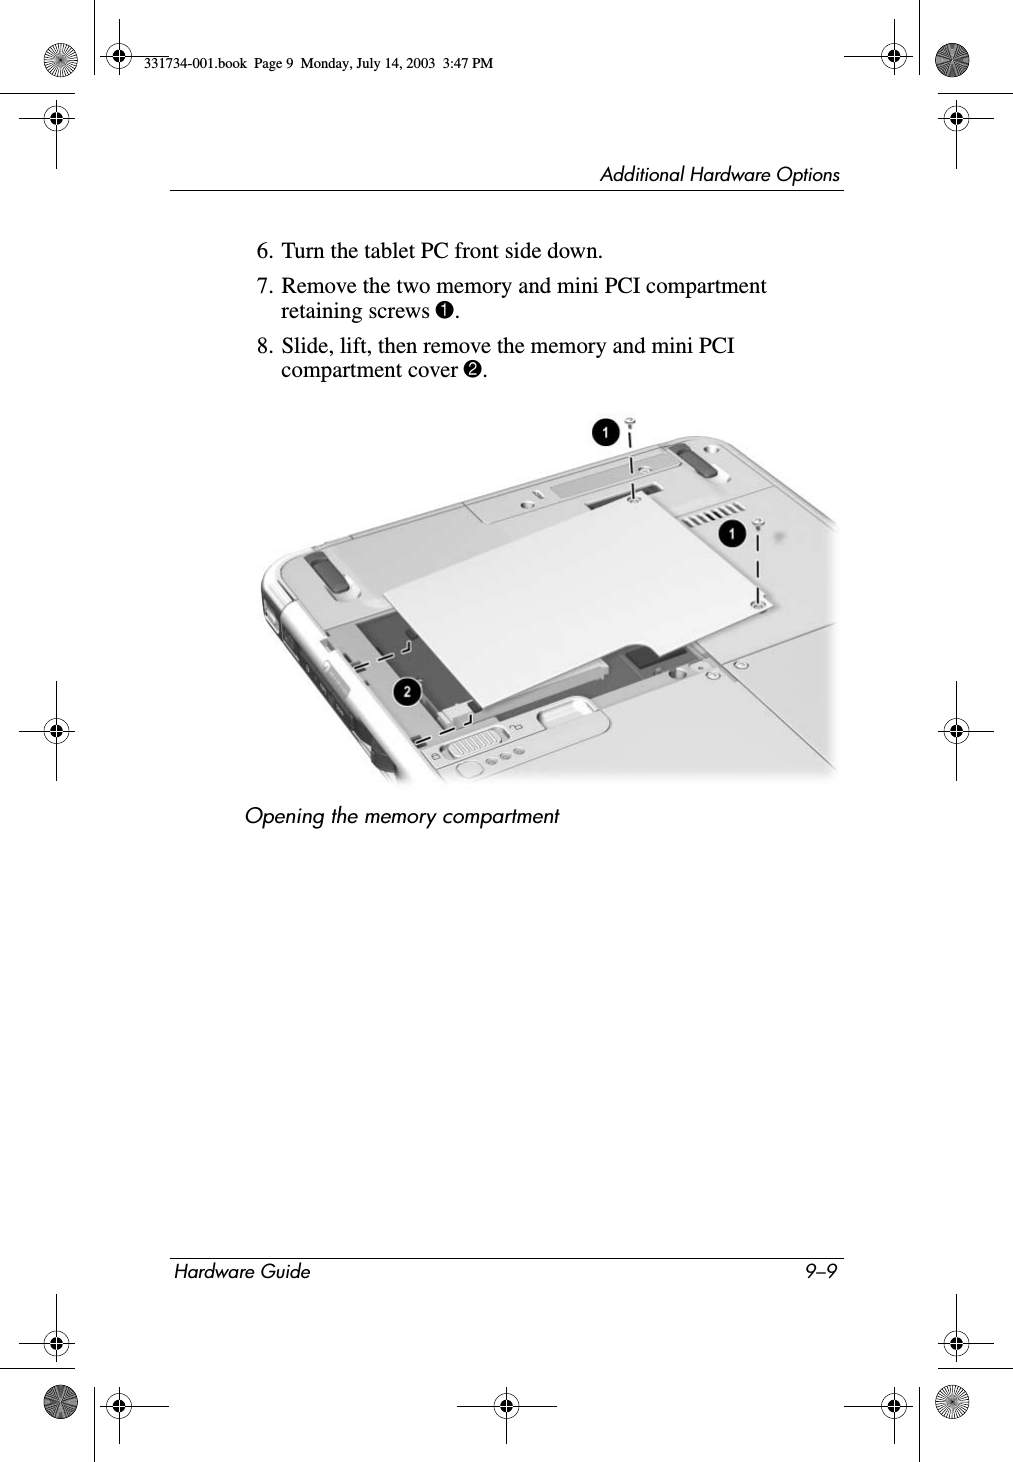 Additional Hardware OptionsHardware Guide 9–96. Turn the tablet PC front side down.7. Remove the two memory and mini PCI compartment retaining screws 1.8. Slide, lift, then remove the memory and mini PCI compartment cover 2.Opening the memory compartment331734-001.book  Page 9  Monday, July 14, 2003  3:47 PM